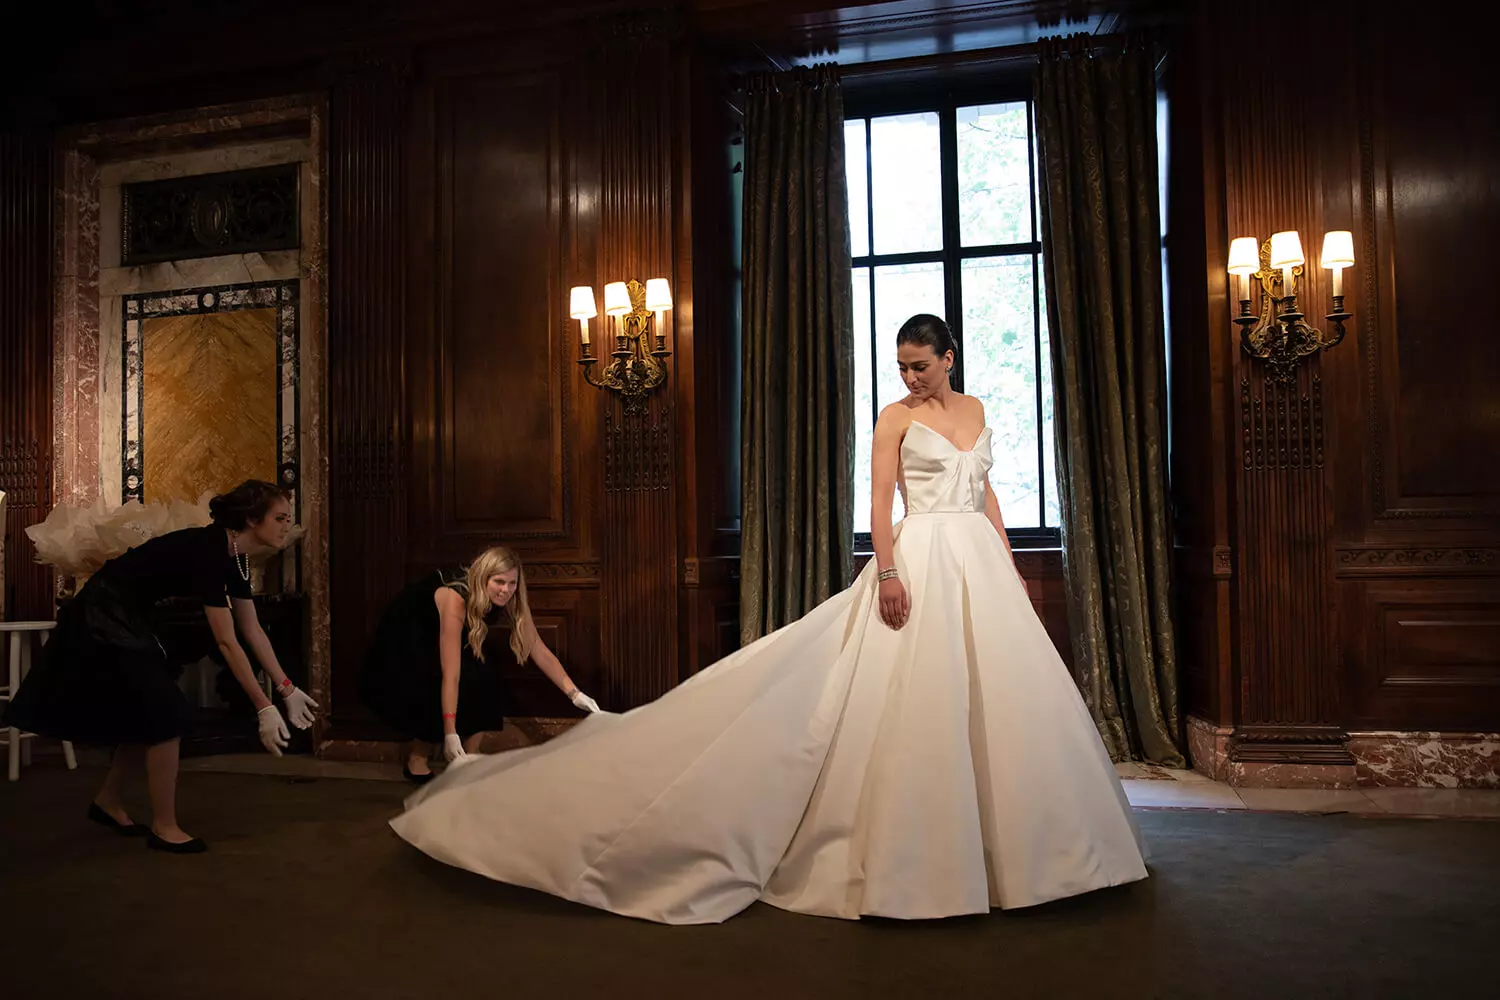 Wedding day services. Your Ladies in Waiting take care of everything you need on your wedding day from steaming the wedding dress to repairing broken zippers. Each stylist is trained and certified in The Stylish Bride way.